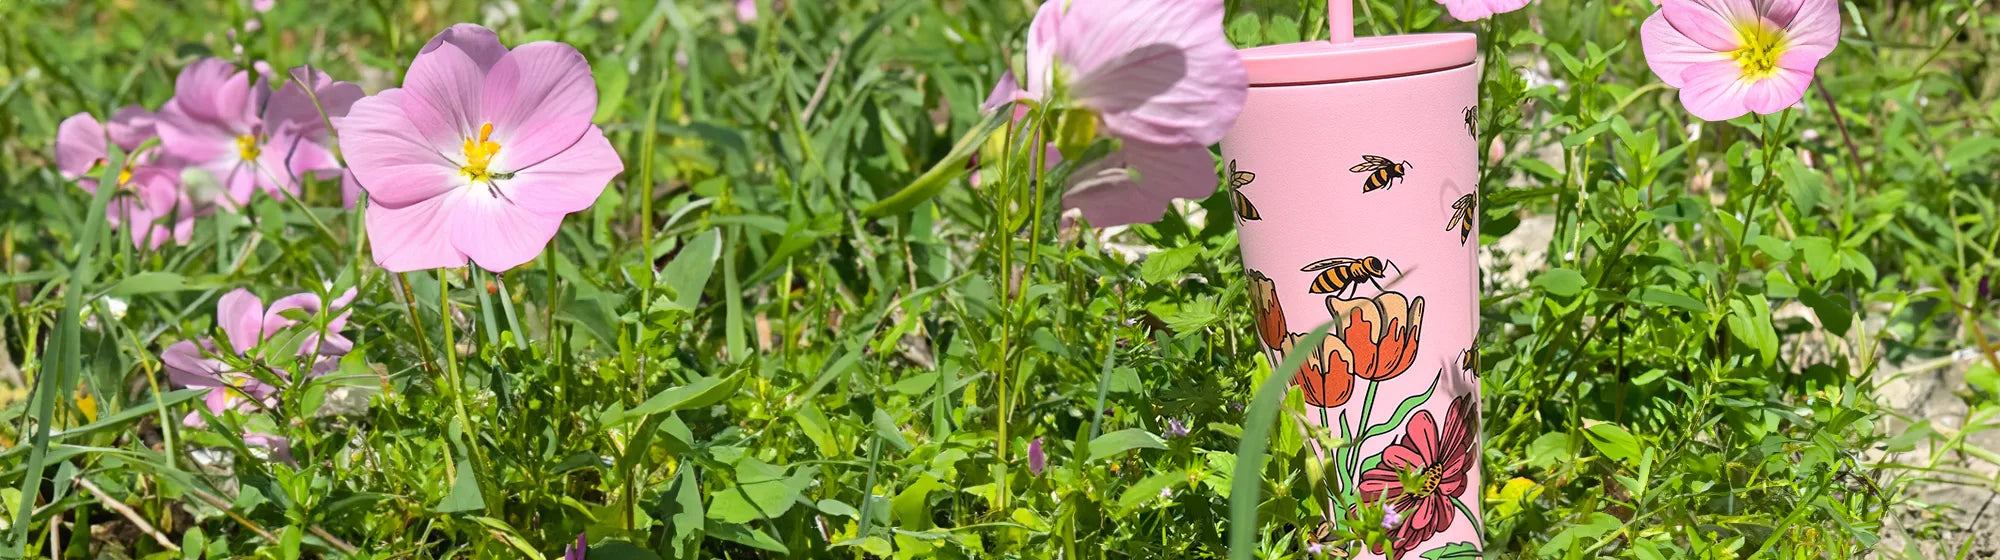 classic straw tumbler wrap butterfly design, in a garden of pink primrose